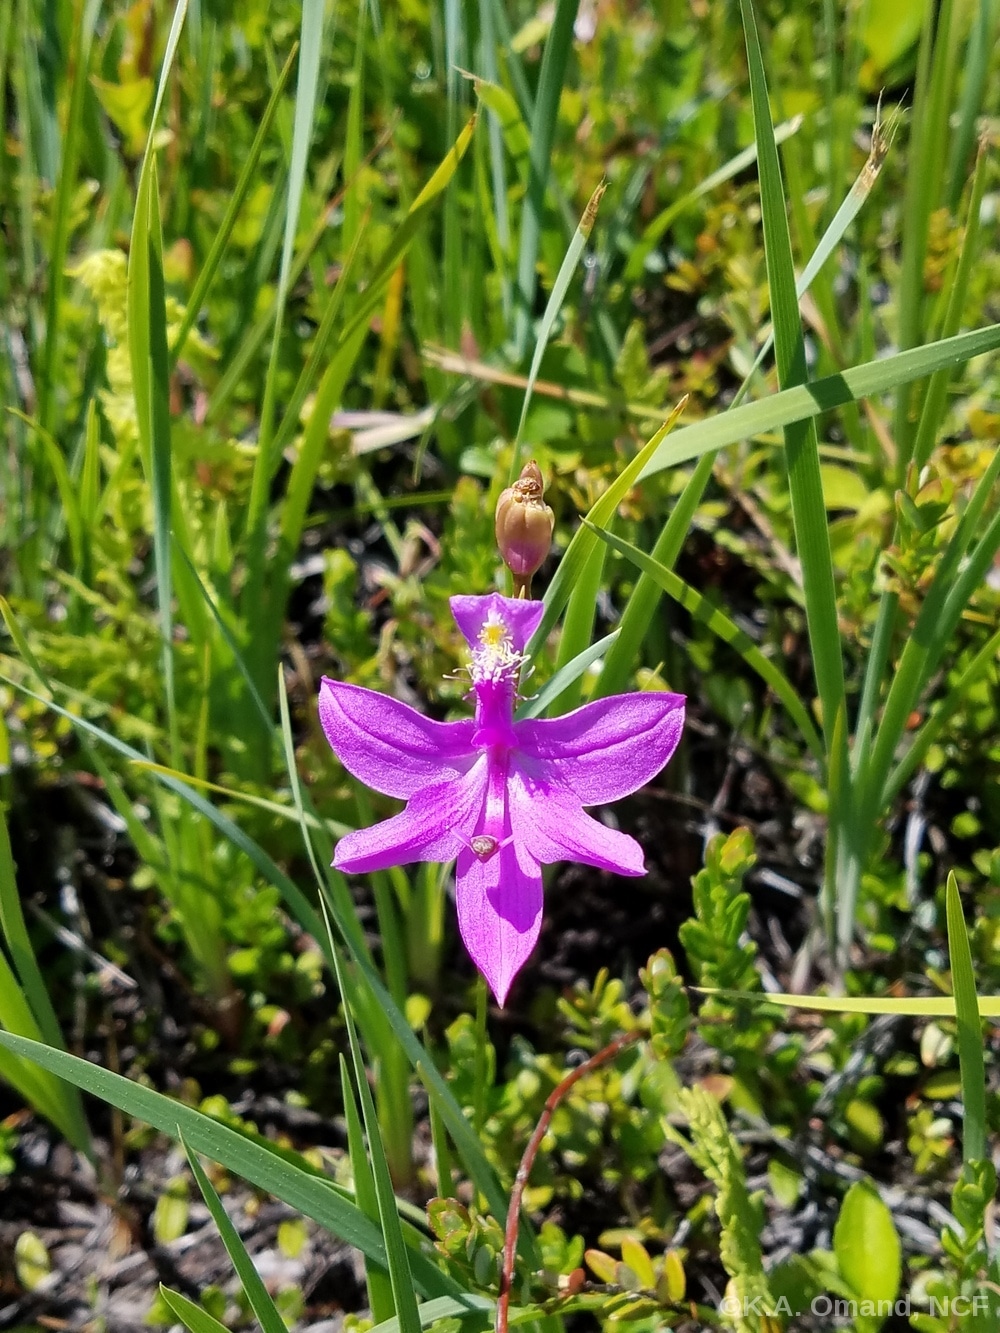 Tuberous grass pink (Calopogon tuberosus), an orchid found in bogs. This one is open.